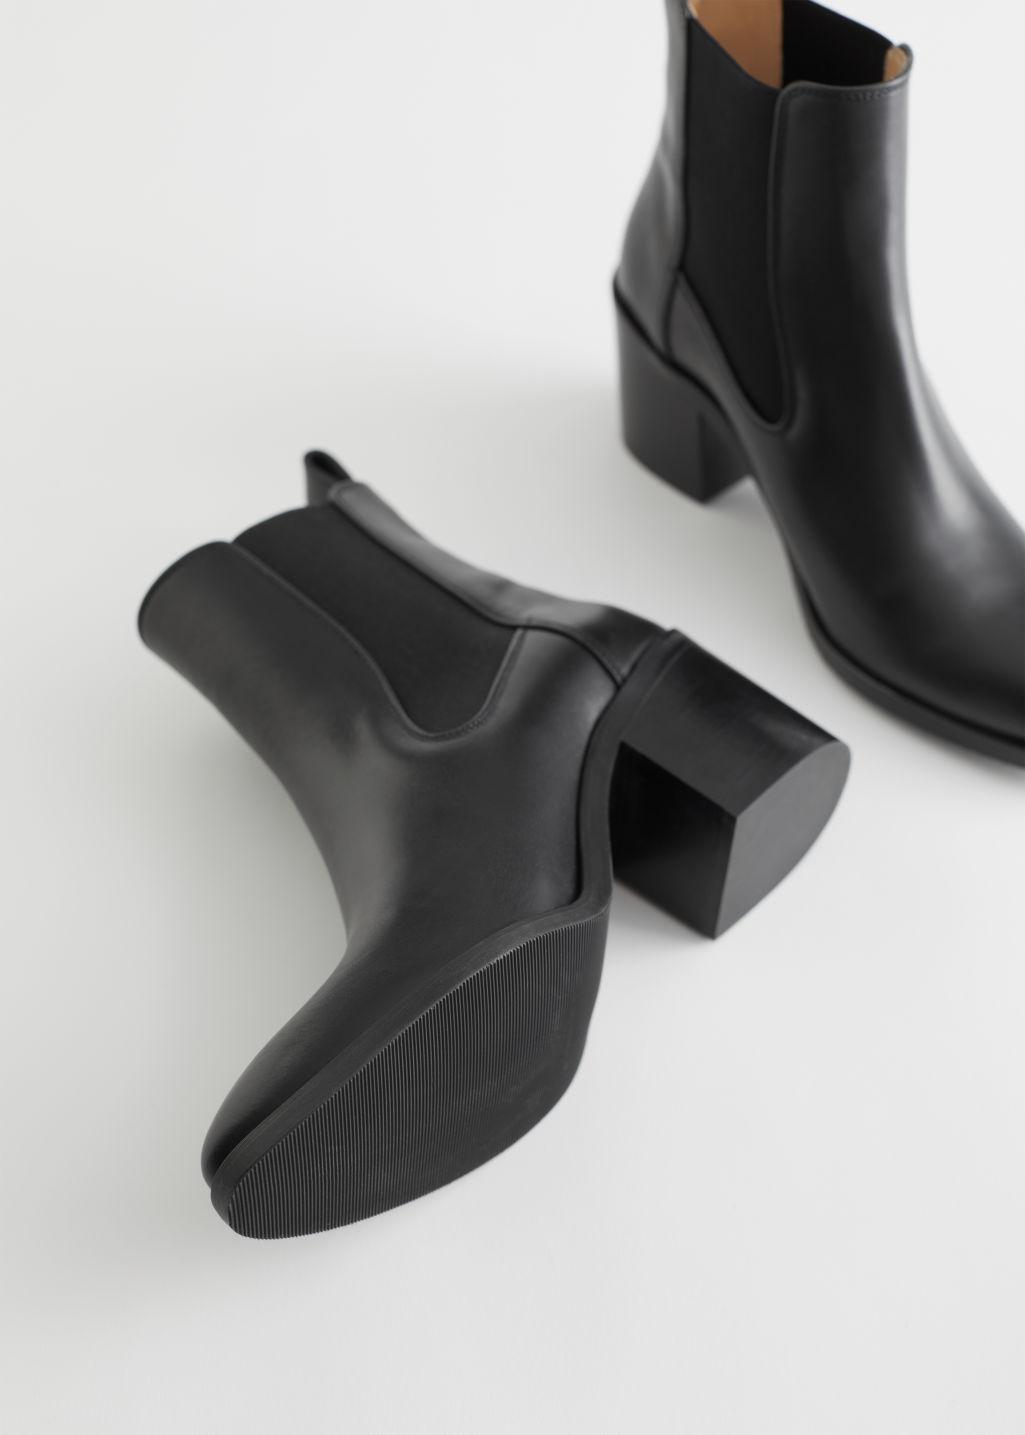 & Other Stories Heeled Leather Chelsea Boots in Black - Lyst